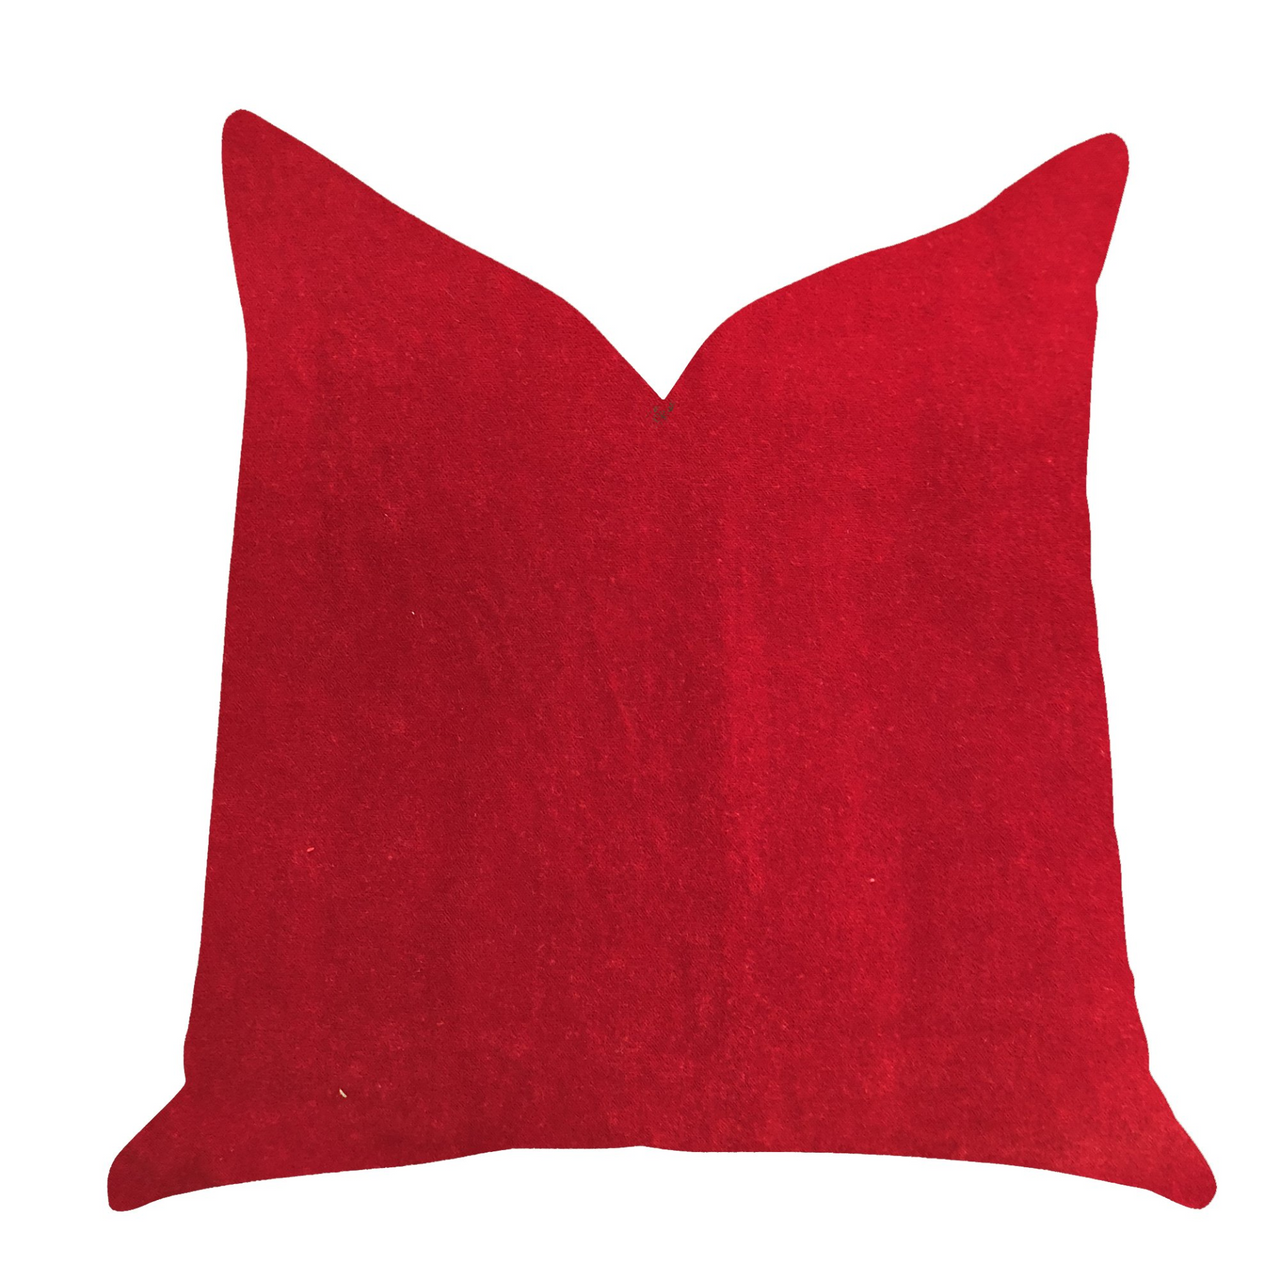 Amber Rose Luxury Throw Pillow in Red